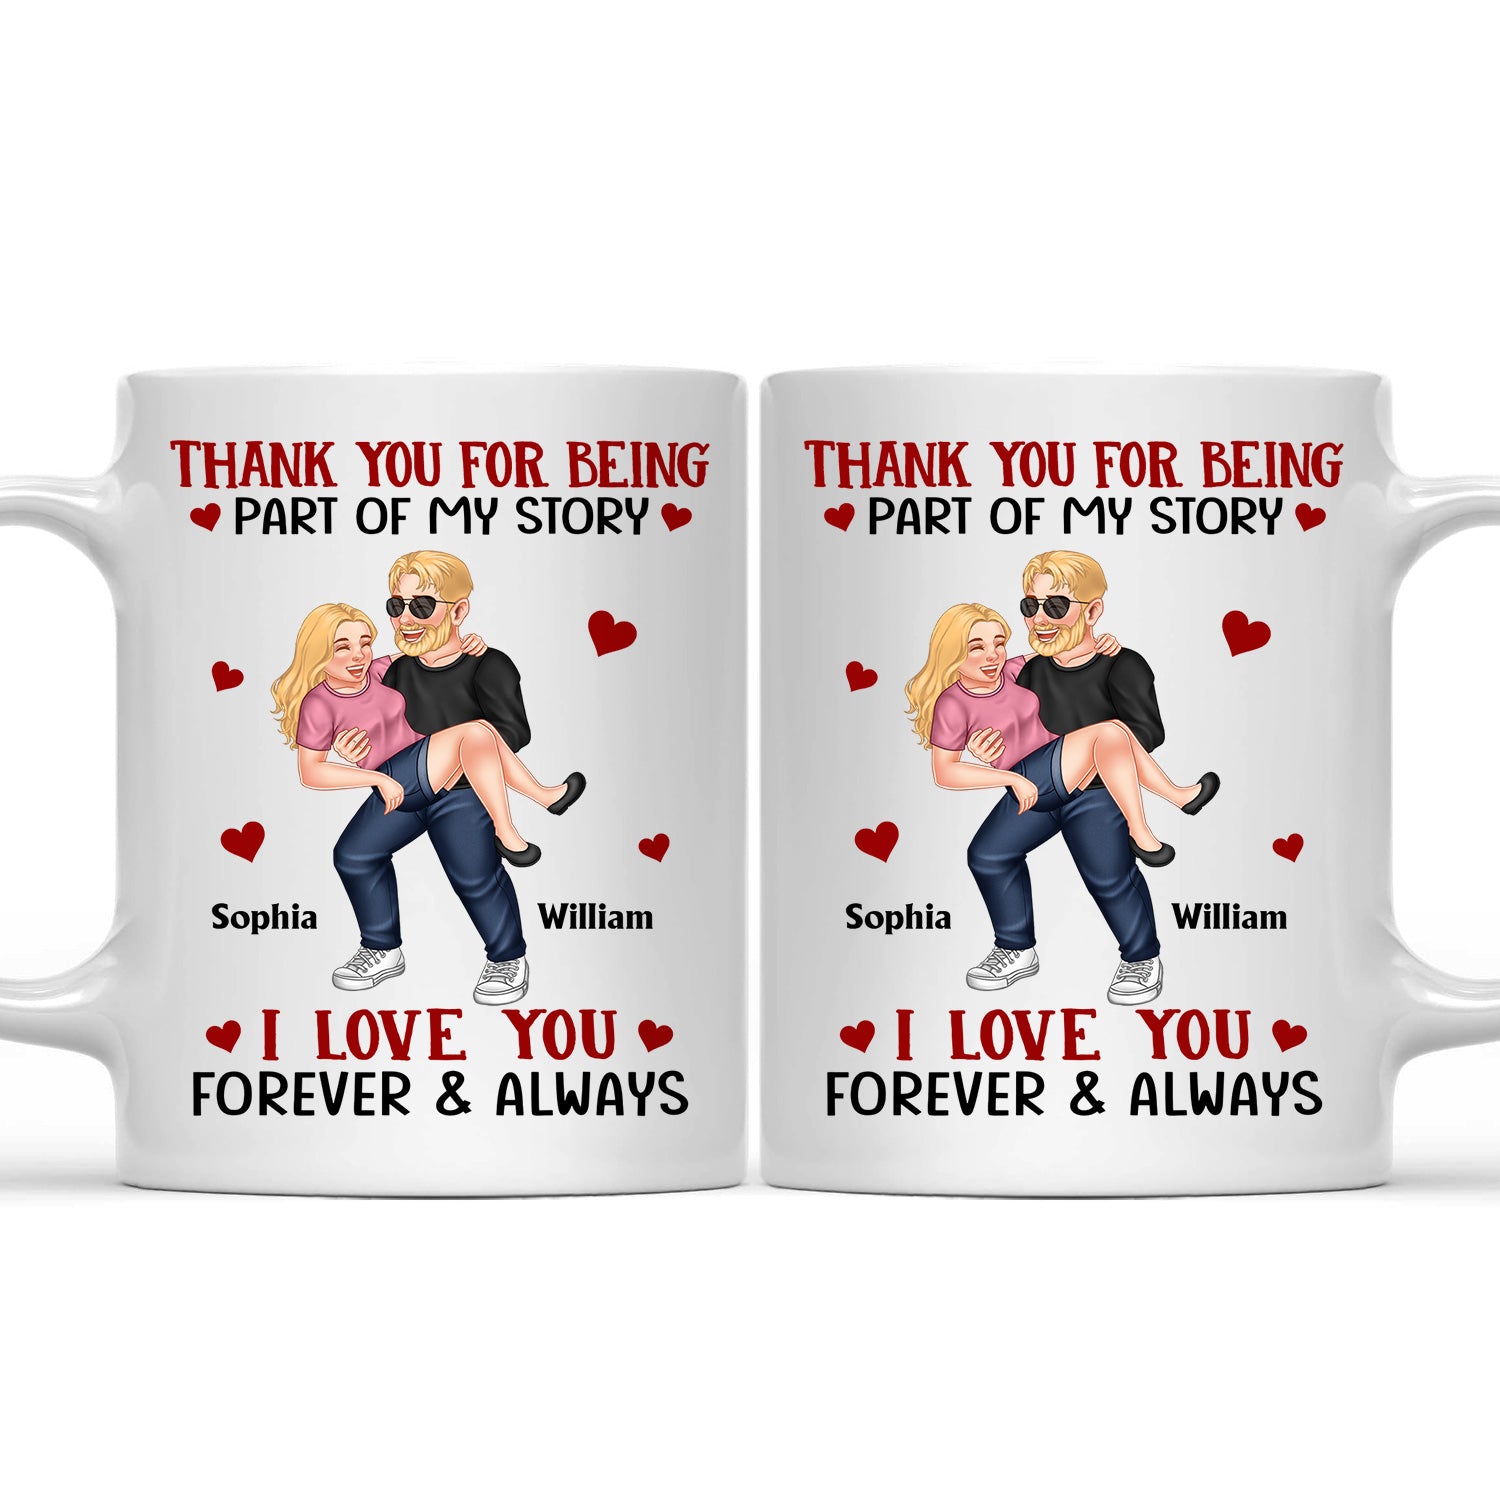 Thank You For Being Part Of My Story - Gift For Couples, Husband, Wife, Boyfriend, Girlfriend - Personalized Mug